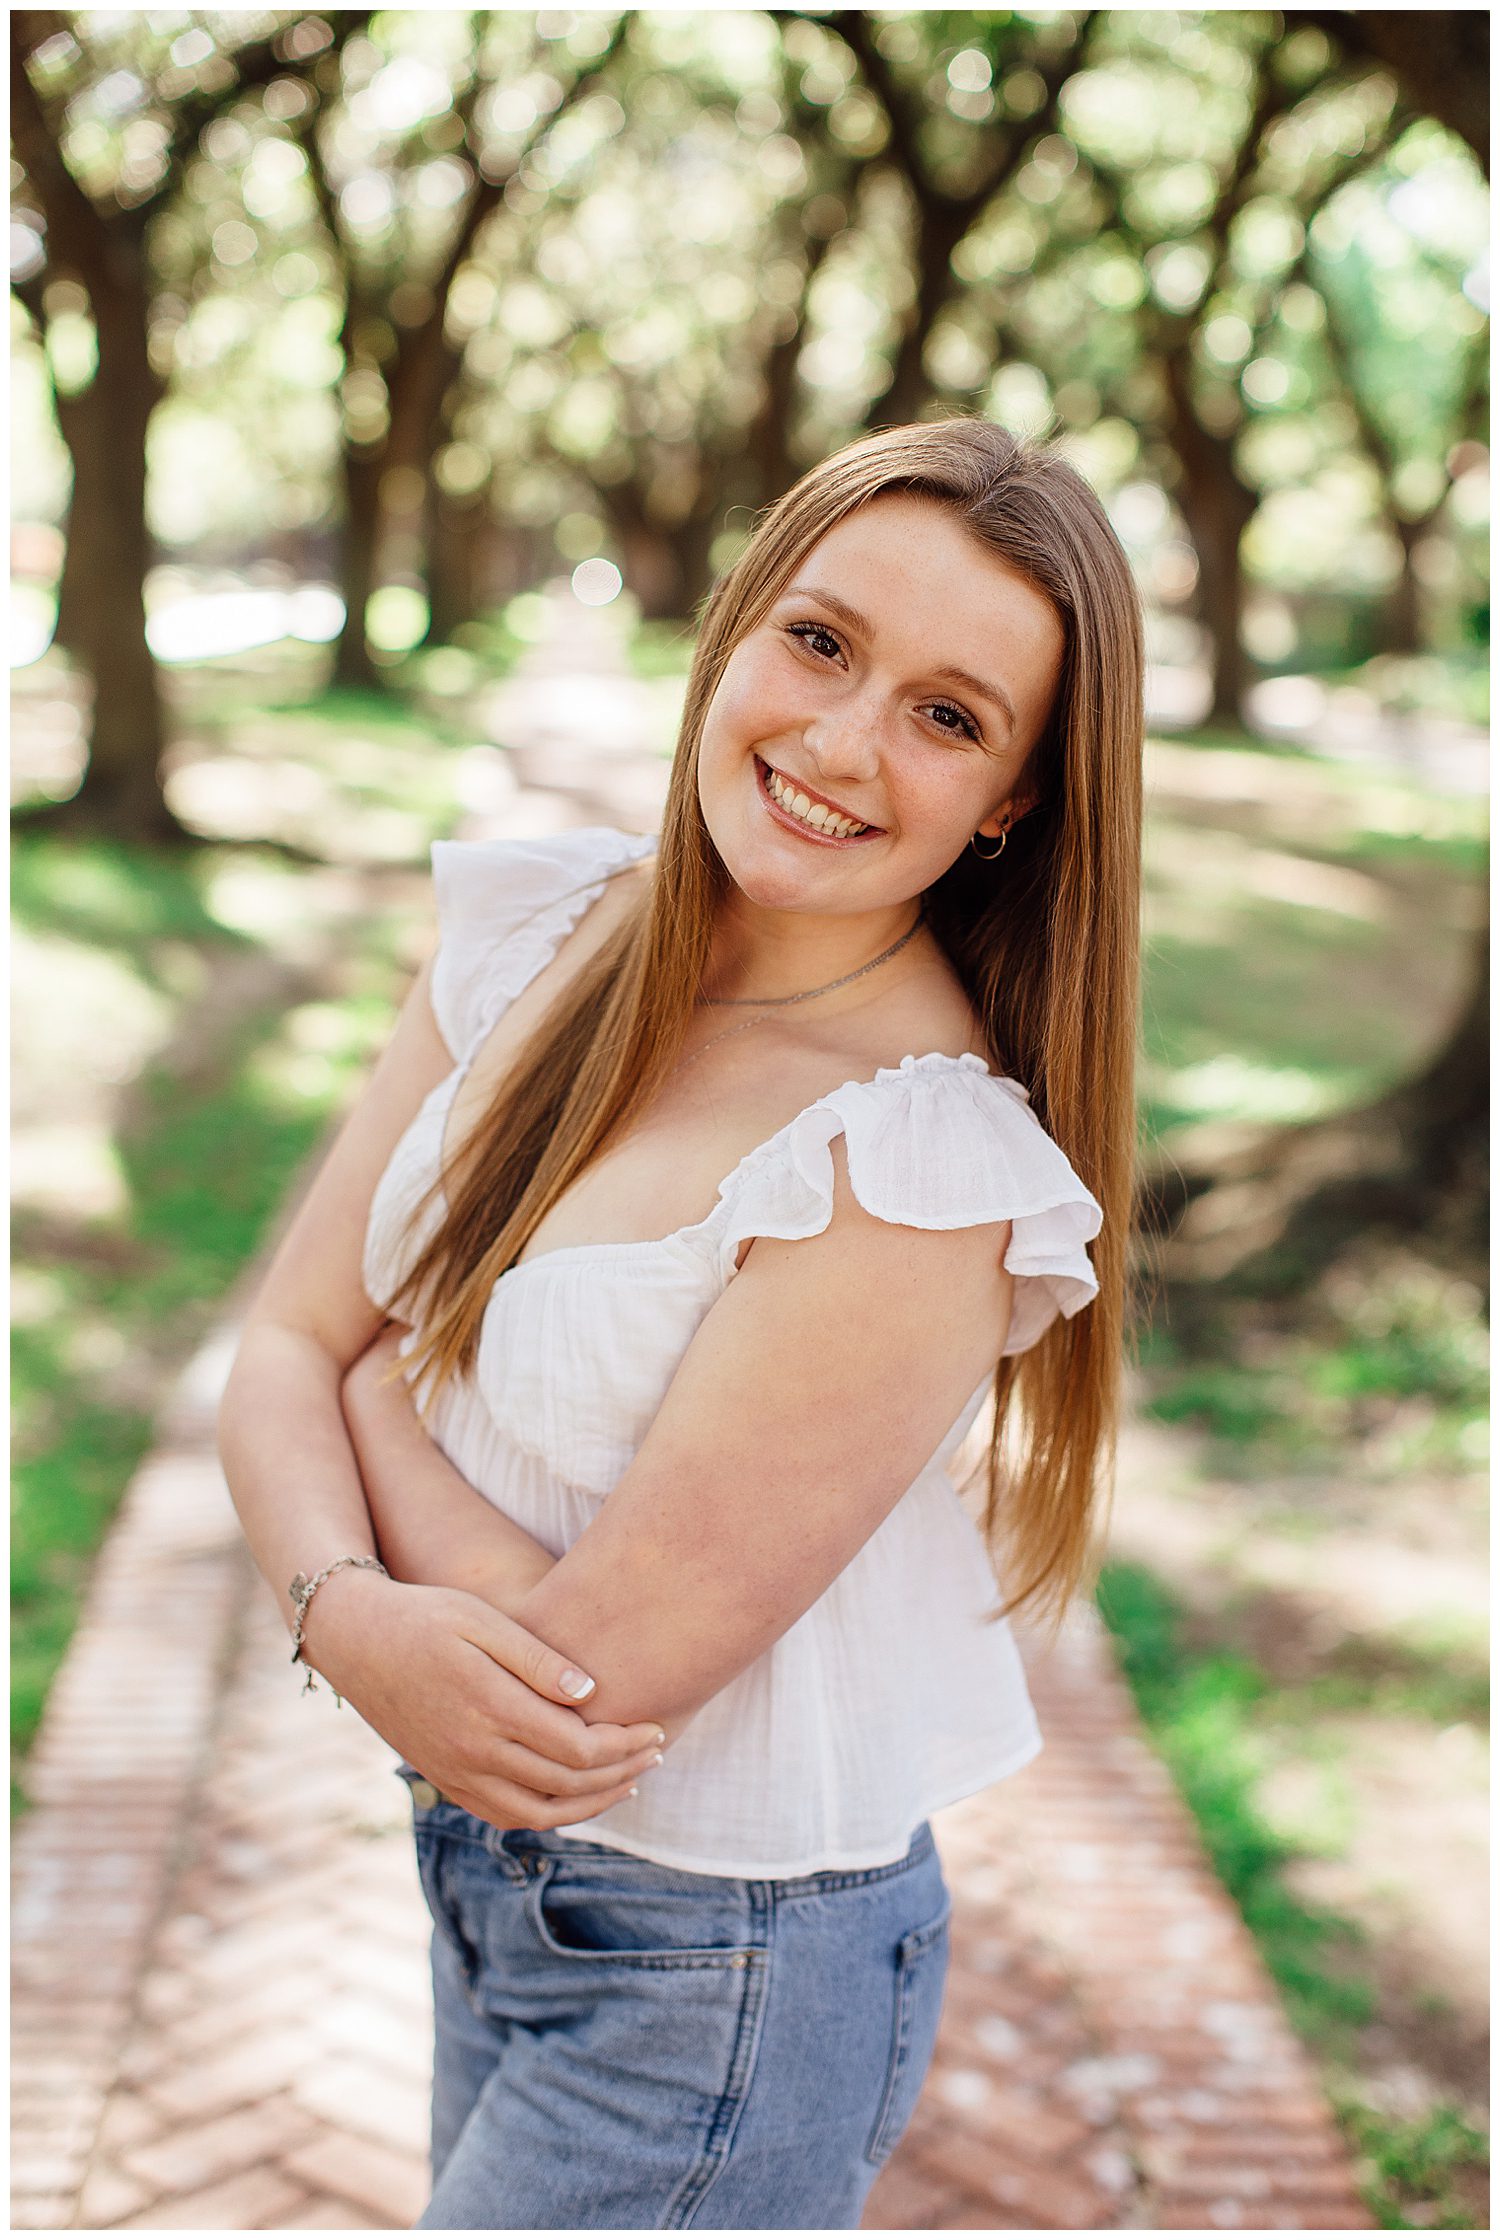 close up image of high school senior girl in jeans and white shirt smiling outdoors with hands crossed